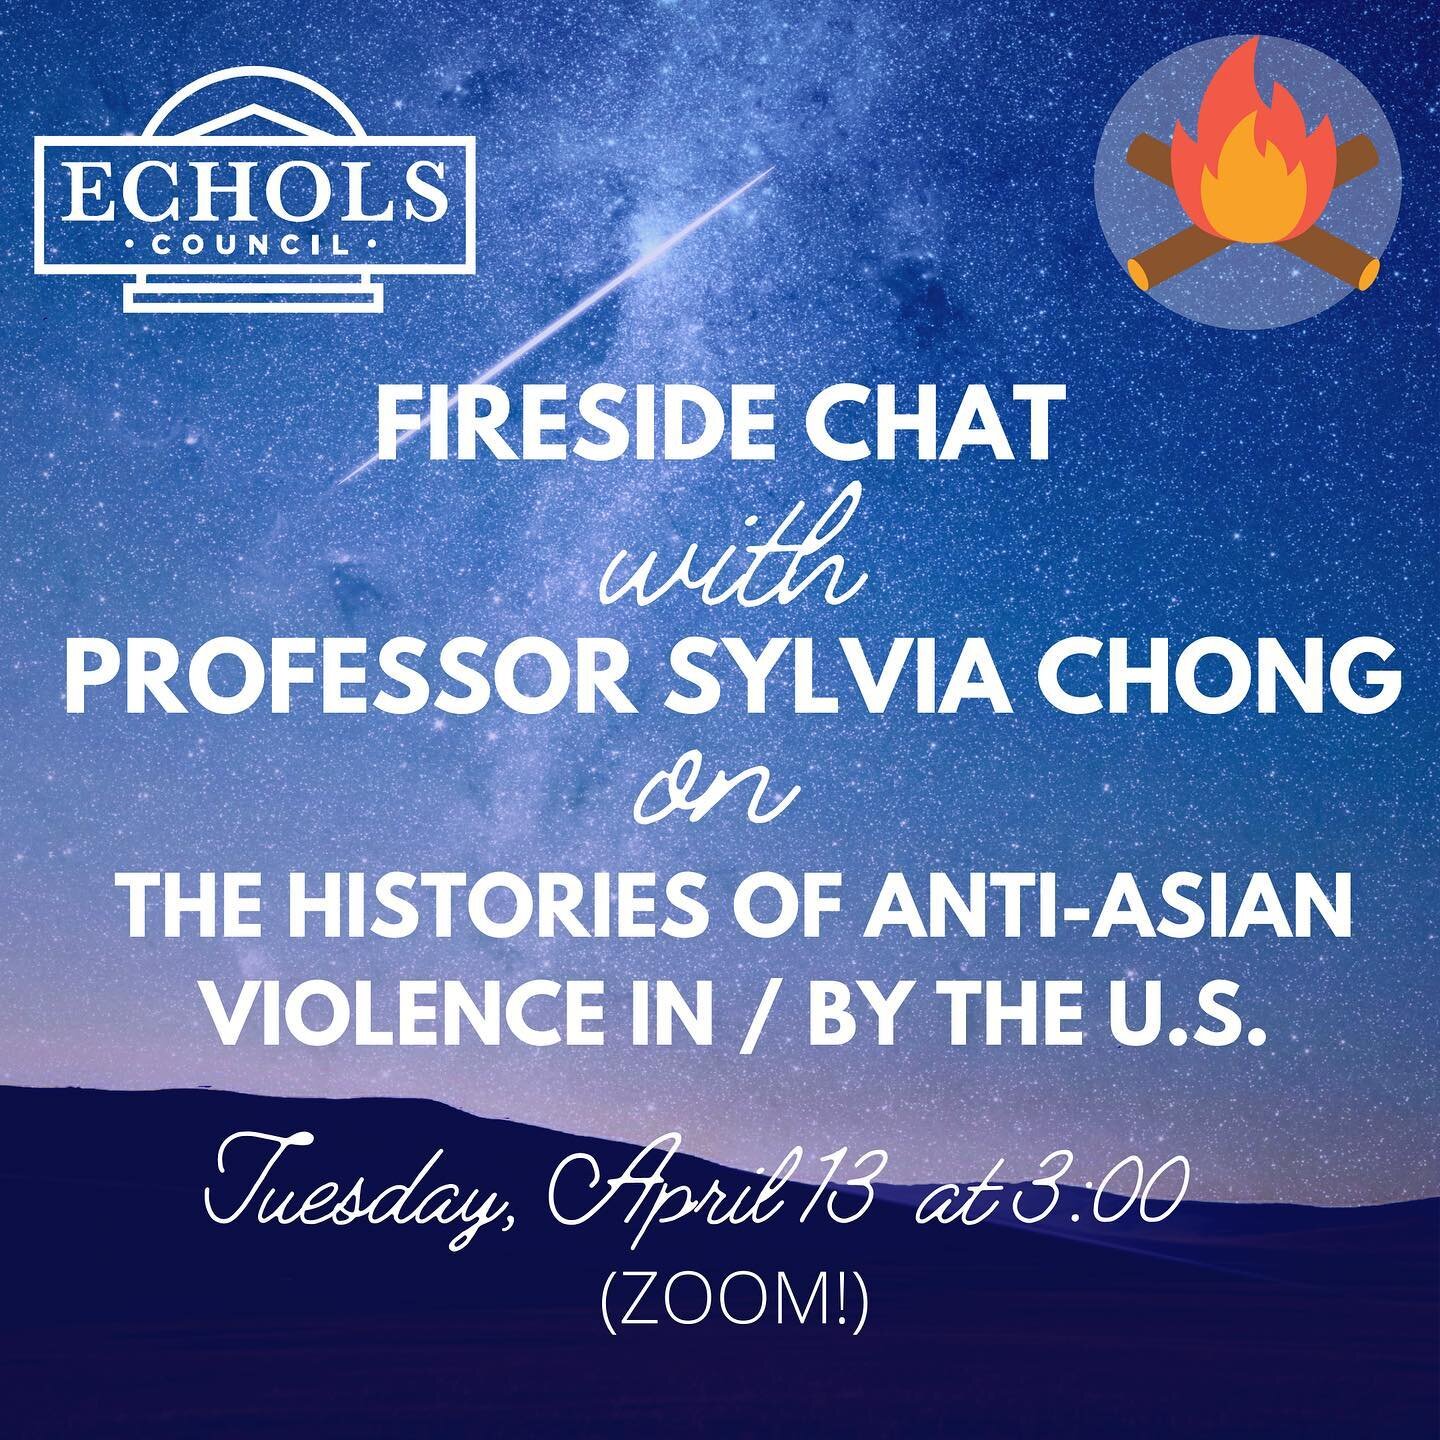 Please join us for the Fireside Chat tomorrow, April 13th at 3:00 PM on Zoom! Prof. Sylvia Chong will be presenting on the Histories of Anti-Asian Violence in / by the U.S. (link  to register in bio)